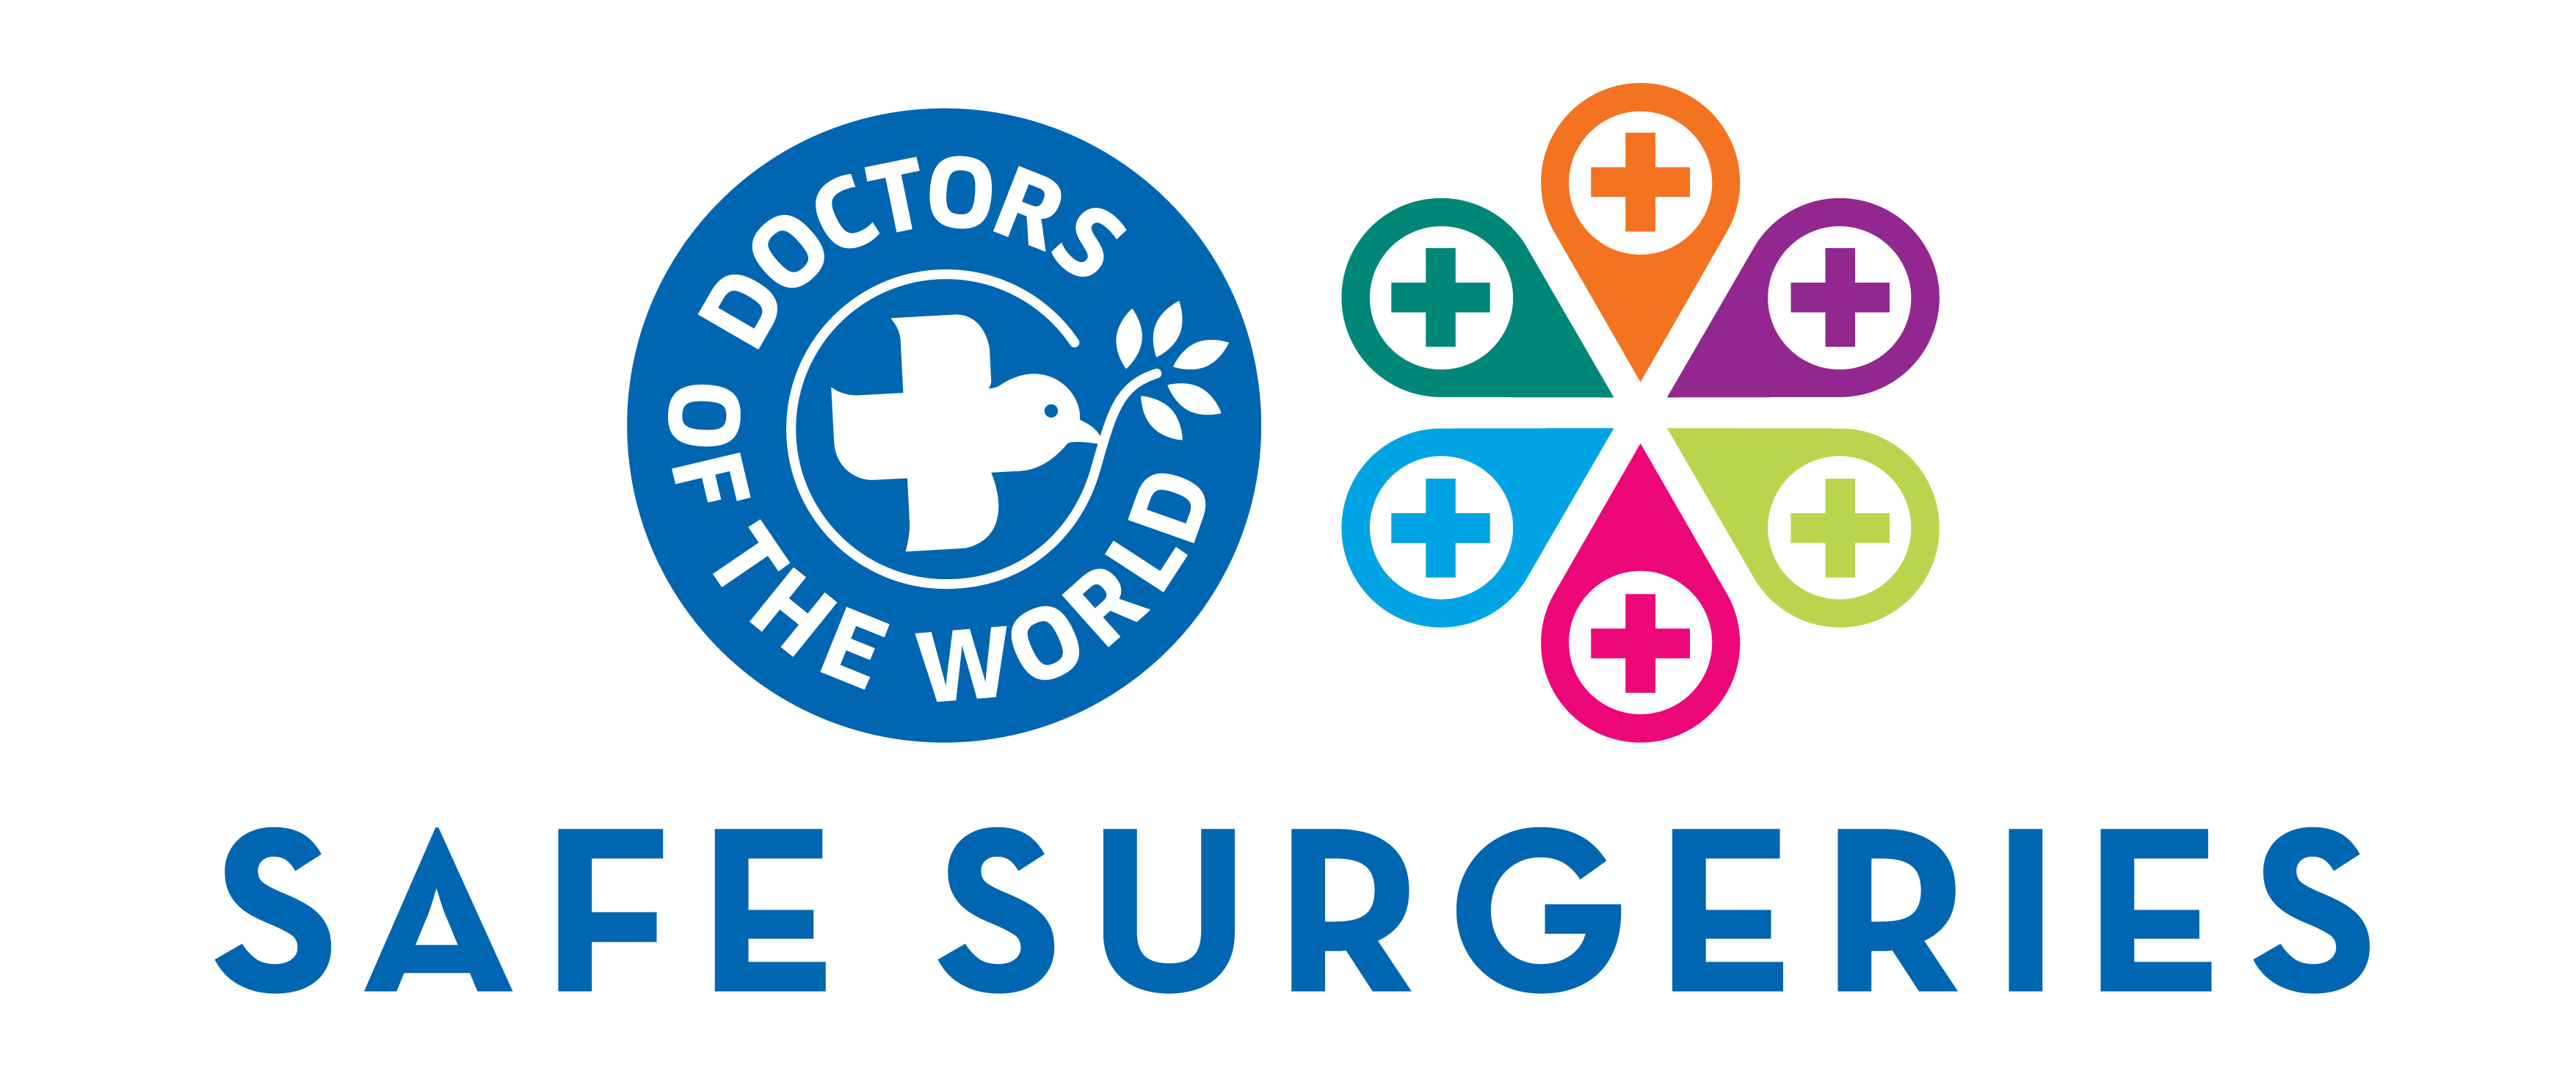 Doctors of the world and safe surgeries logo